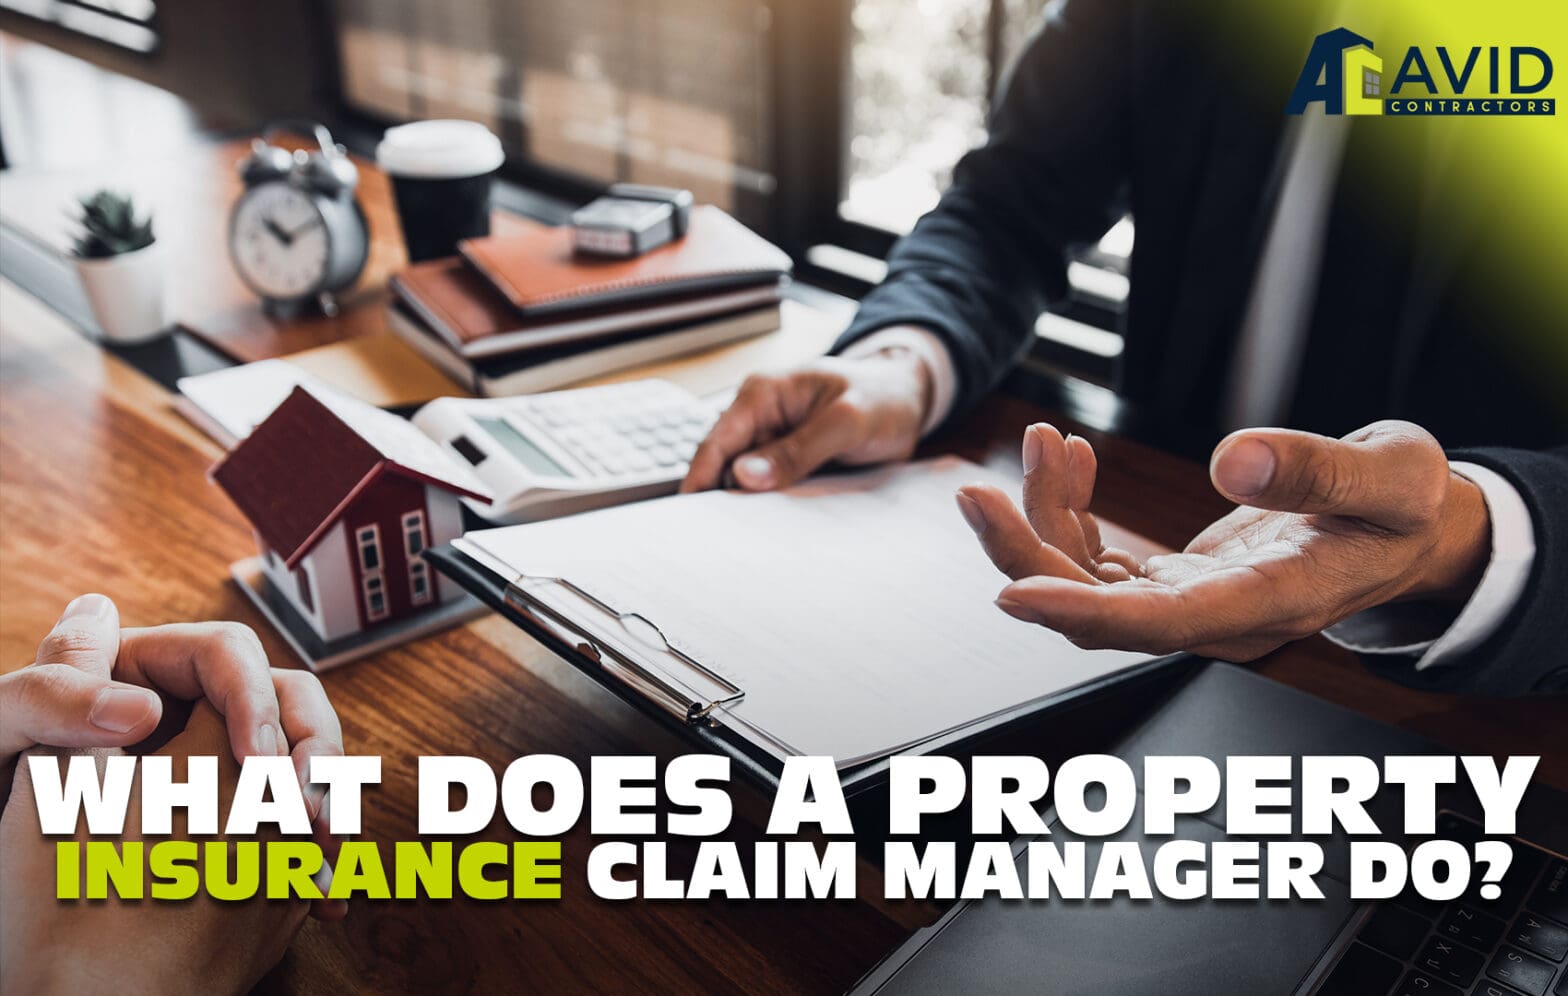 What Does a Property Insurance Claim Manager Do?